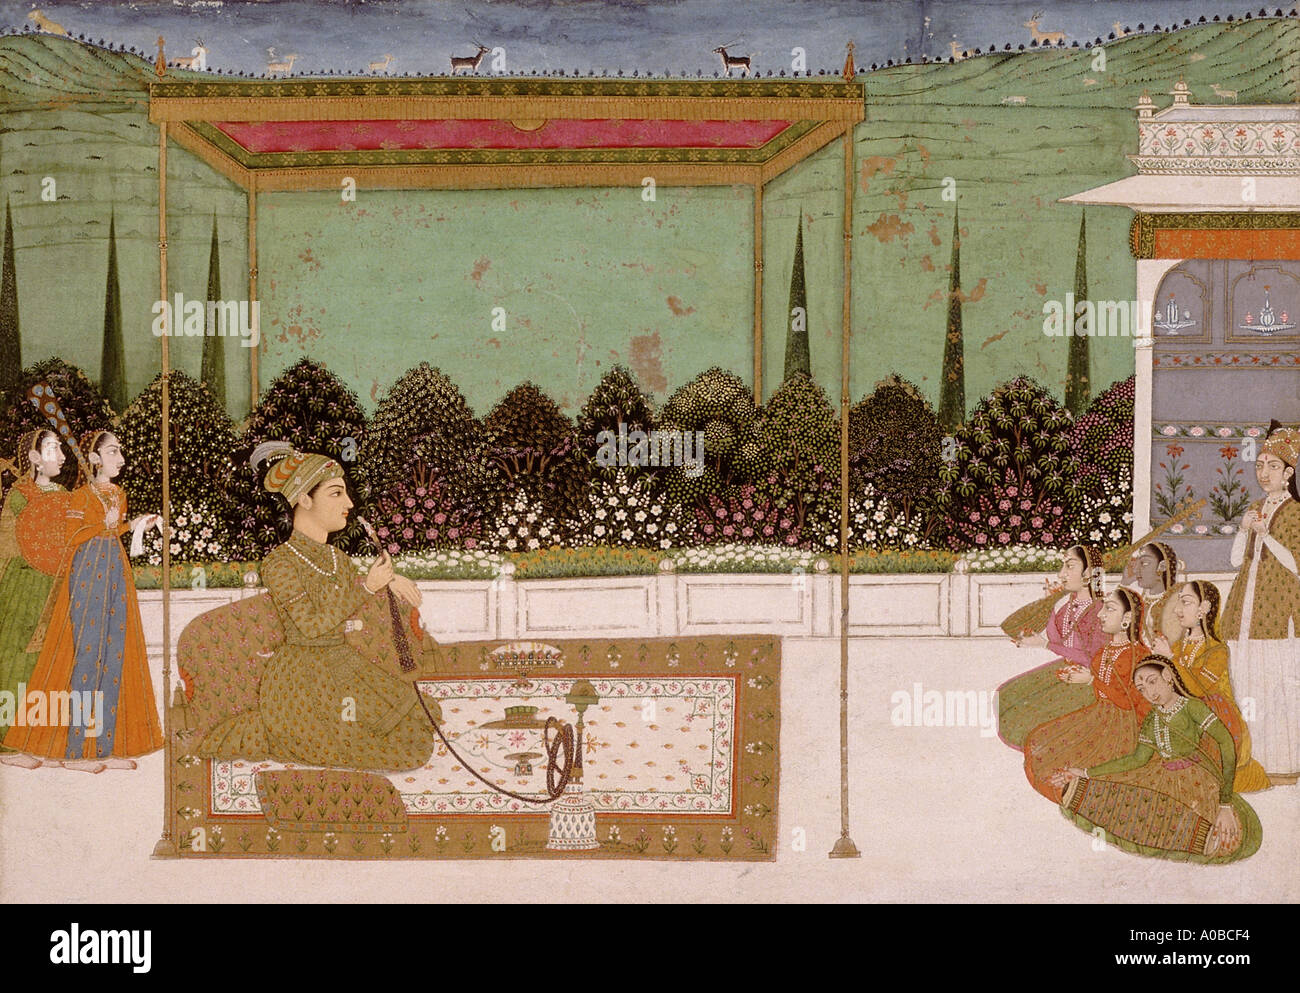 Mughal minitaure painting. Mughal Prince and musicians Dated 1775 A D Stock Photo